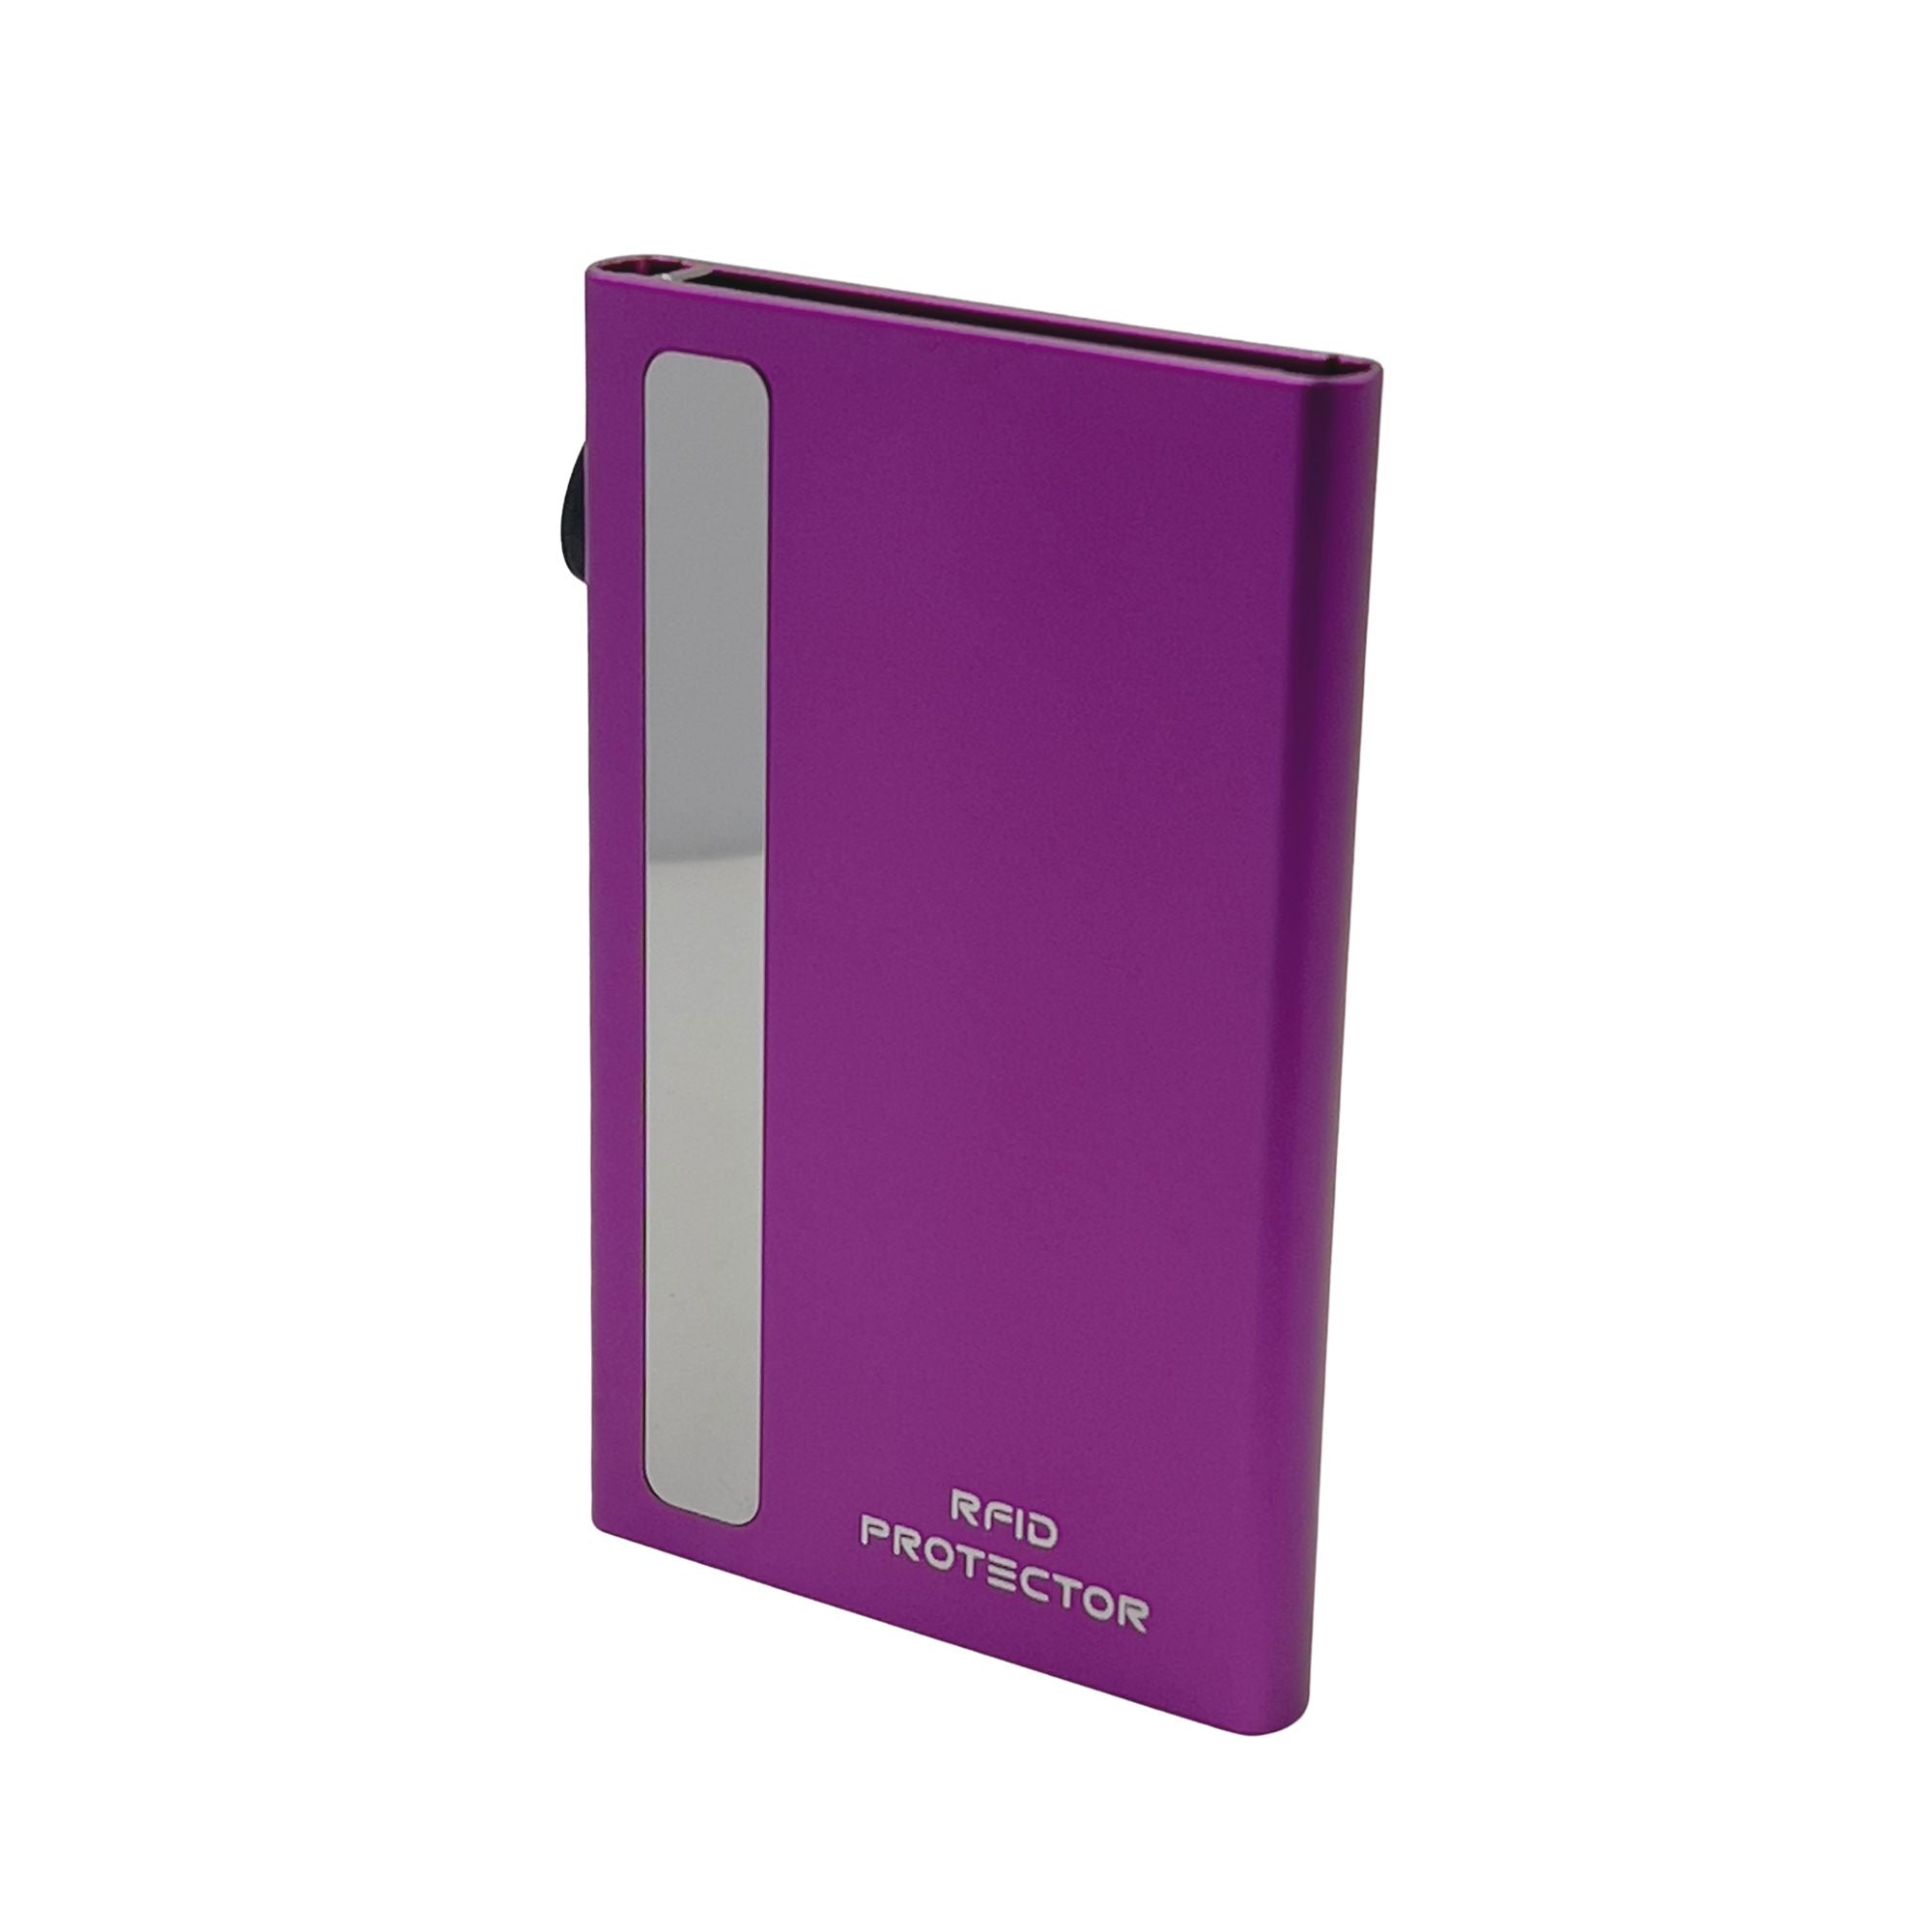 New CardHolder 4.0 Metal with Tesa double-sided tape 